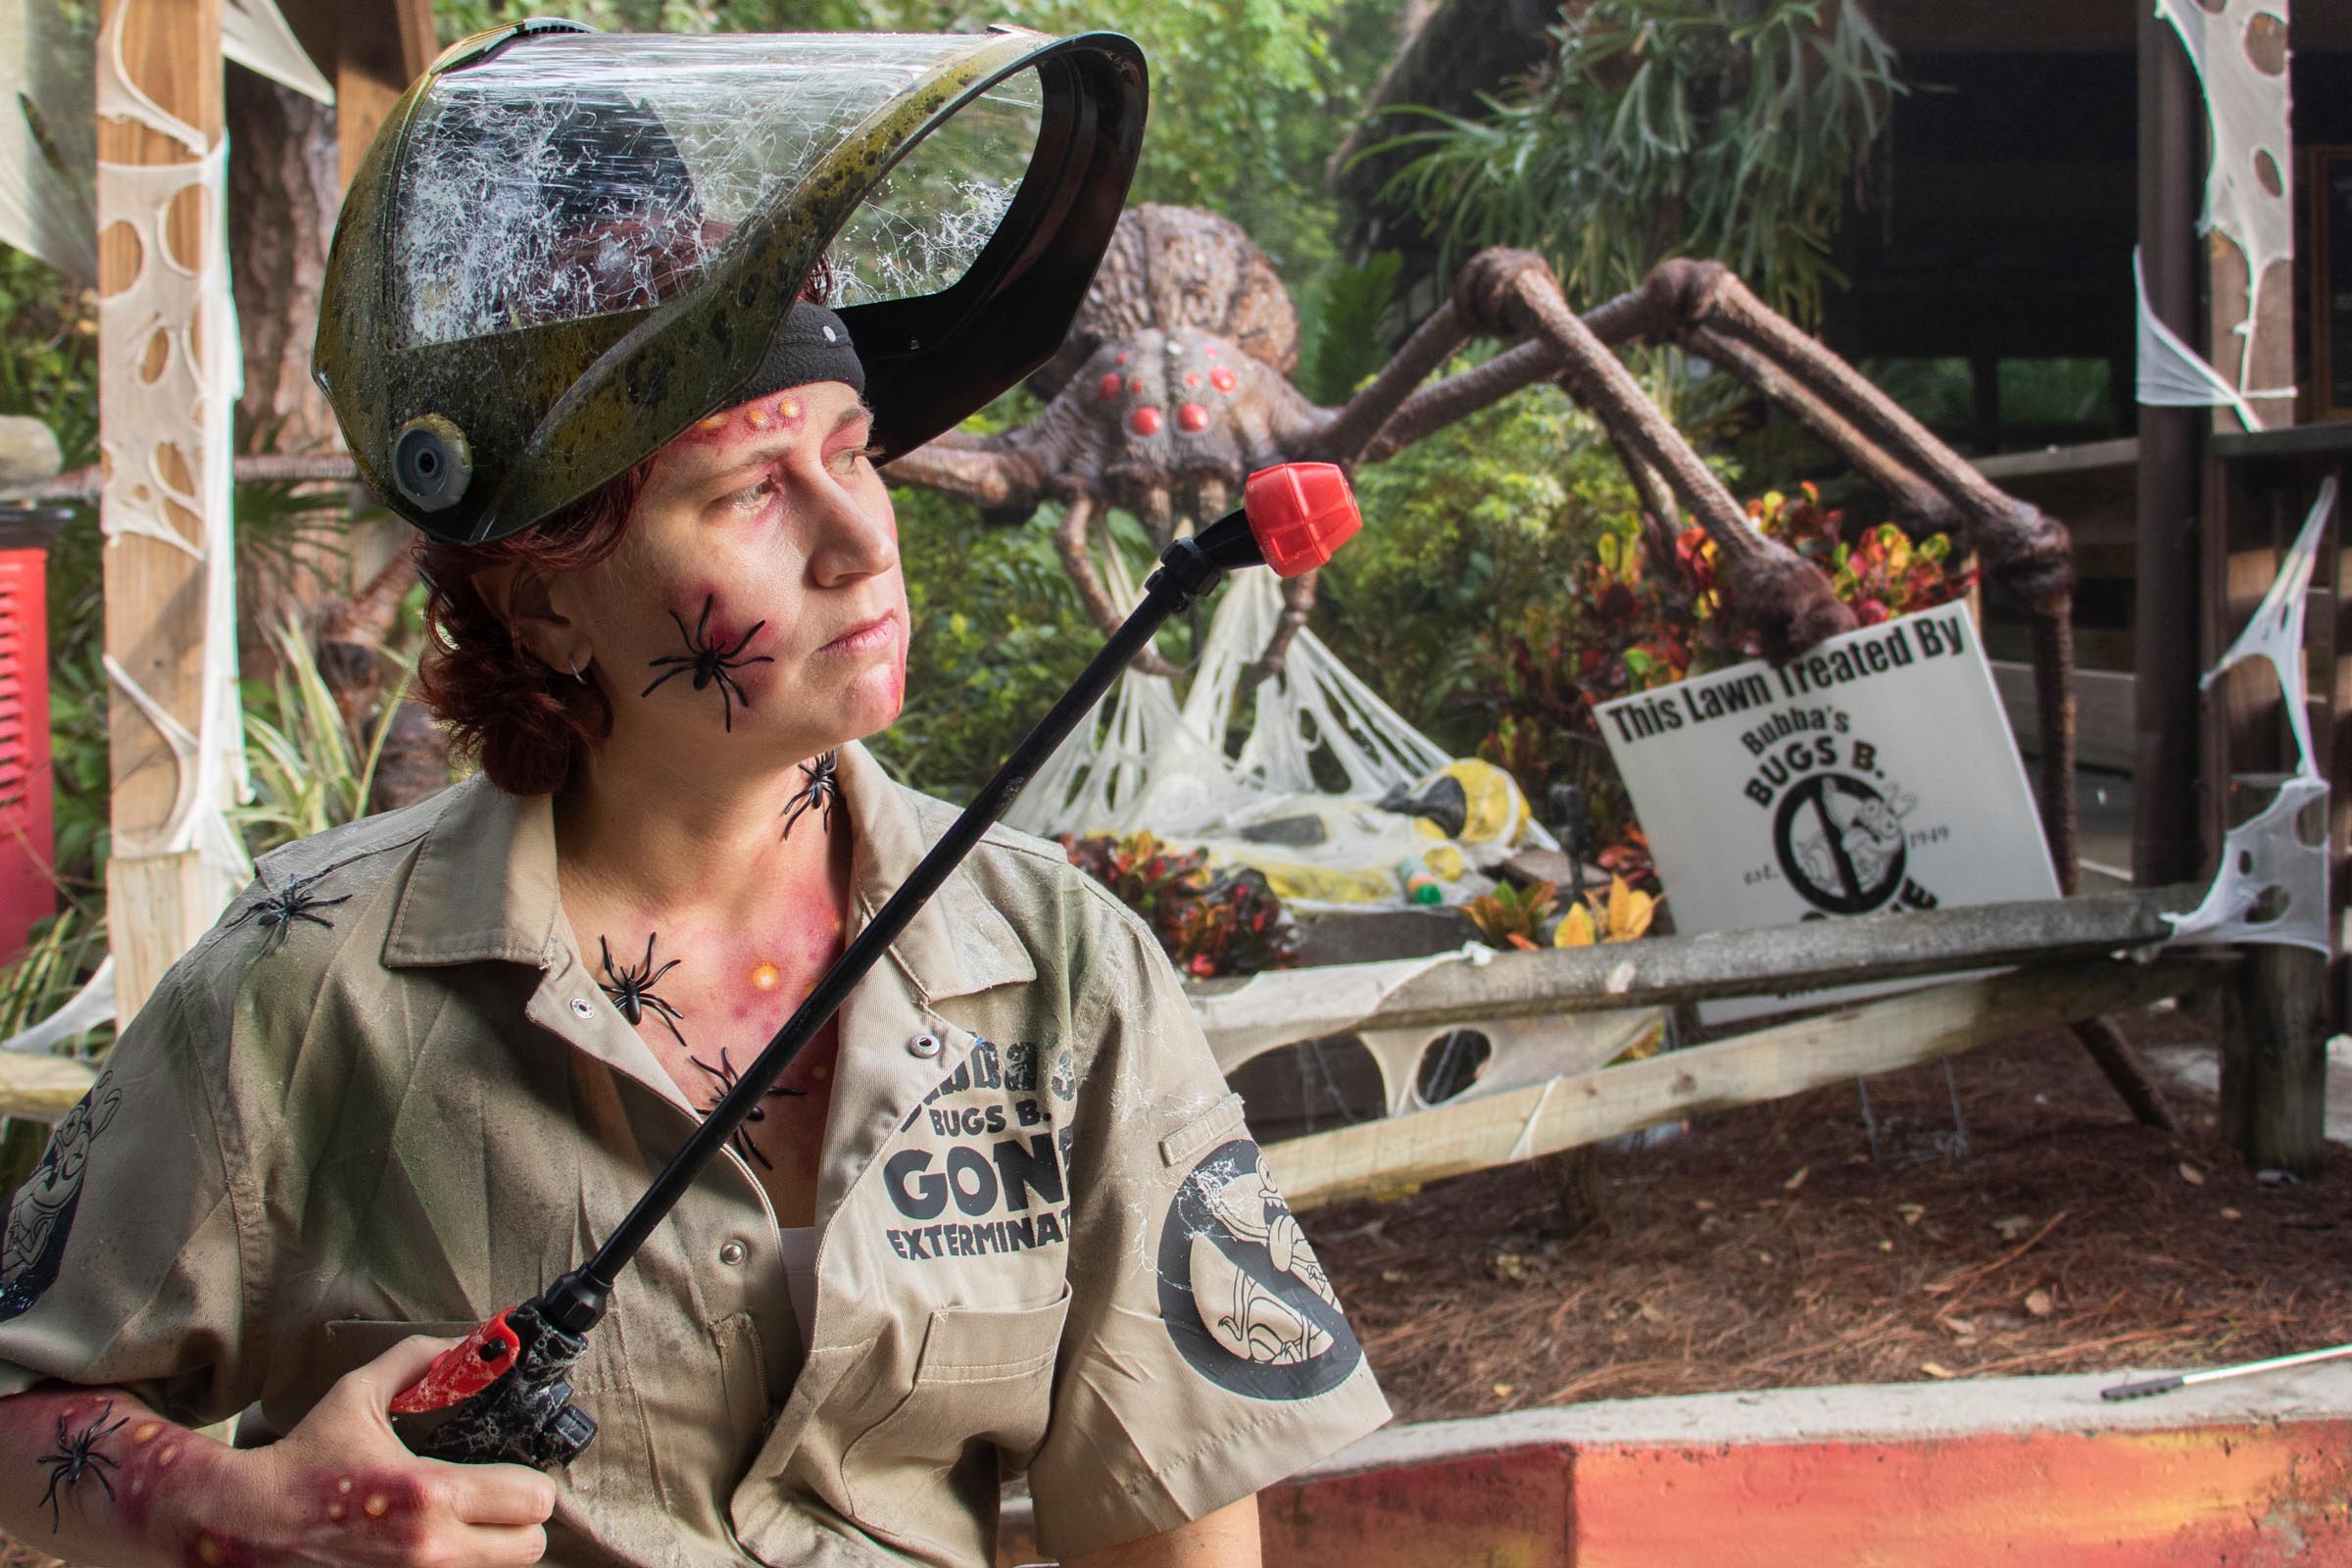 Meet our creepy animals at Gators, Ghosts and Goblins, Gatorland's Halloween event!